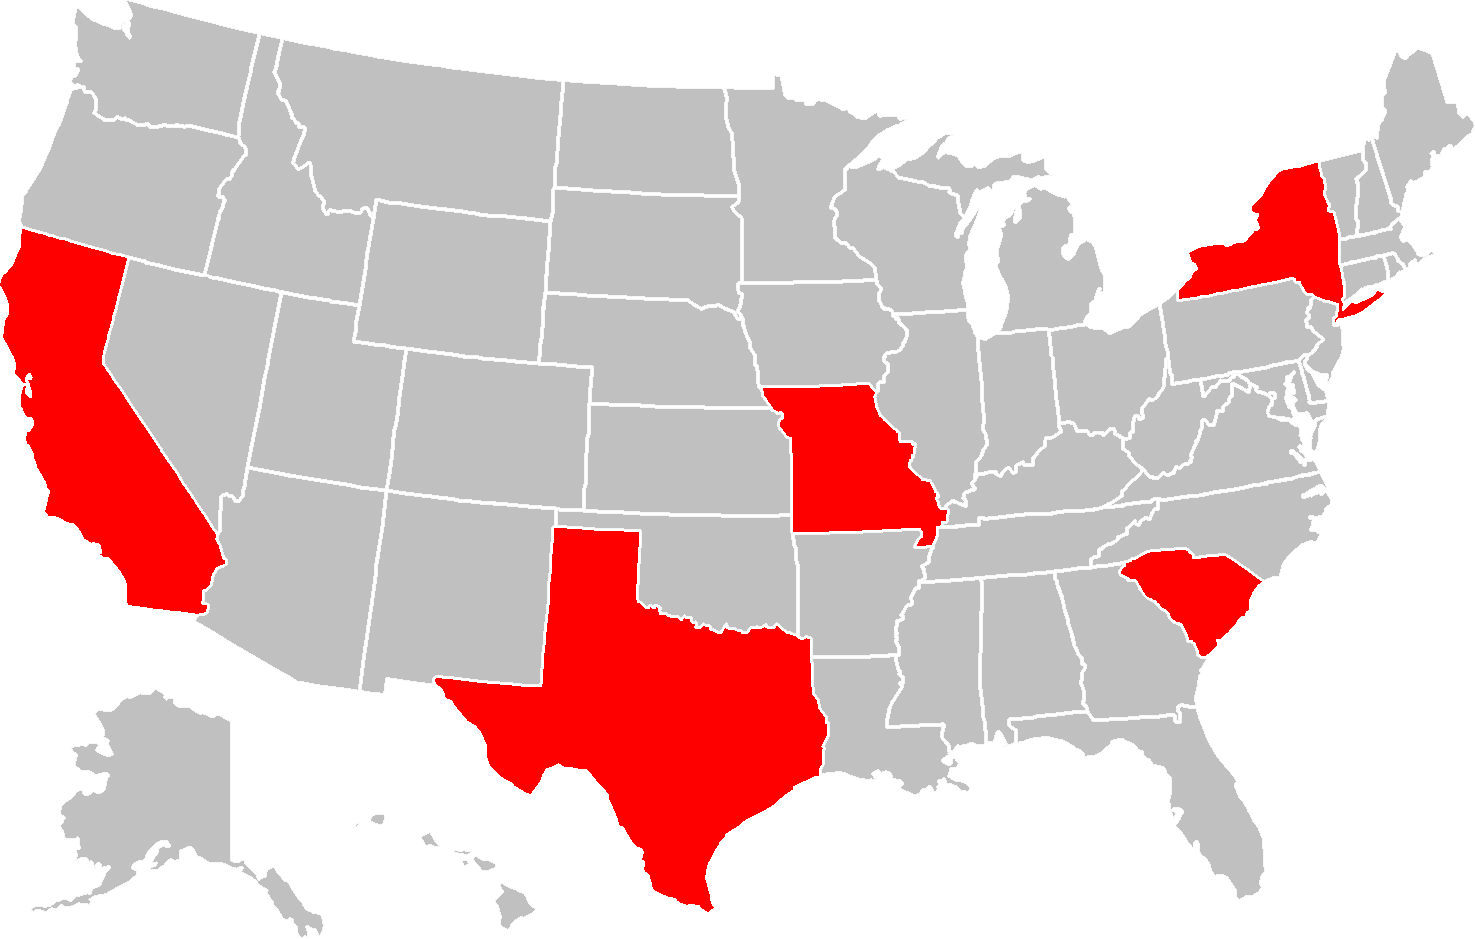 A map of the United States showing PDR Training Locations highlighted in red.